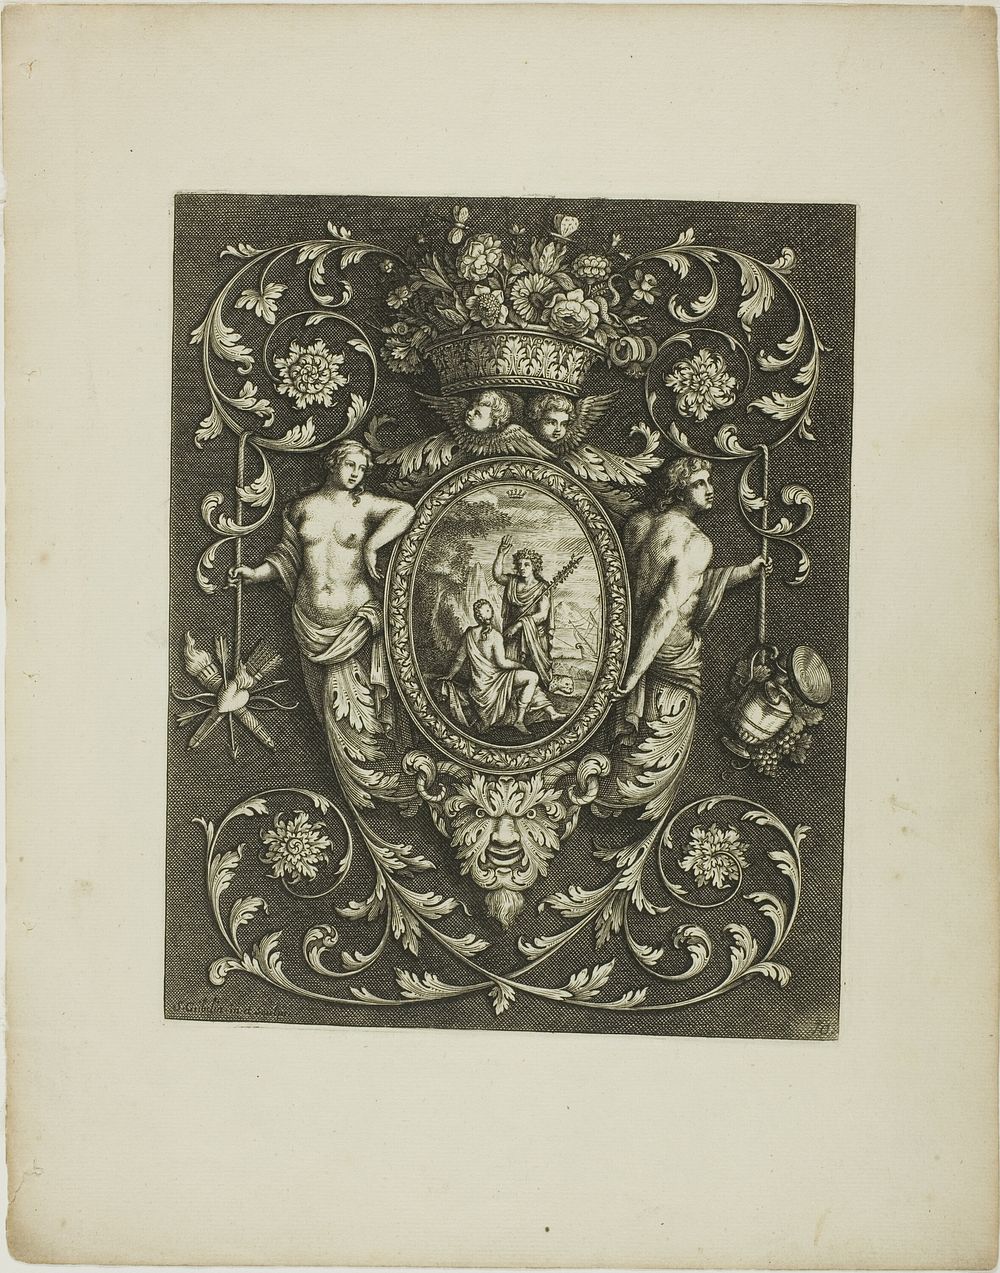 Plate Ten, from A New Book of Ornaments by Simon Gribelin, II